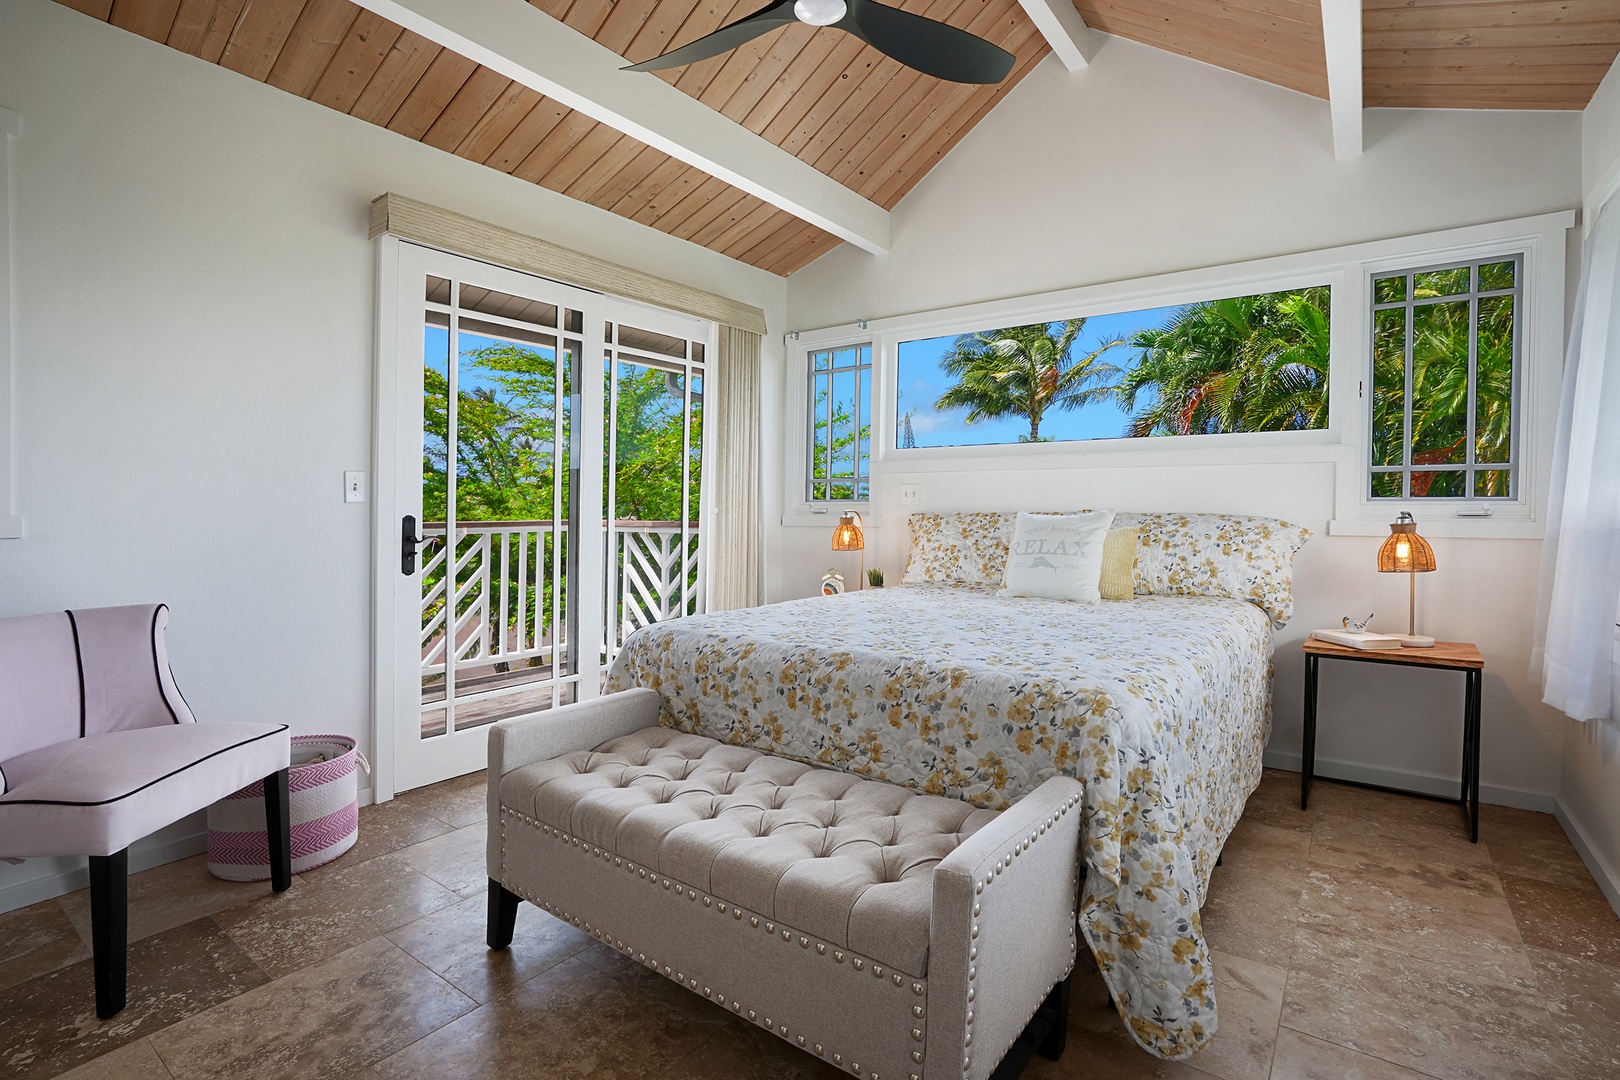 Princeville Vacation Rentals, Kaiana Villa - The second Guest Bedroom is located upstairs and offers a king bed and tropical views